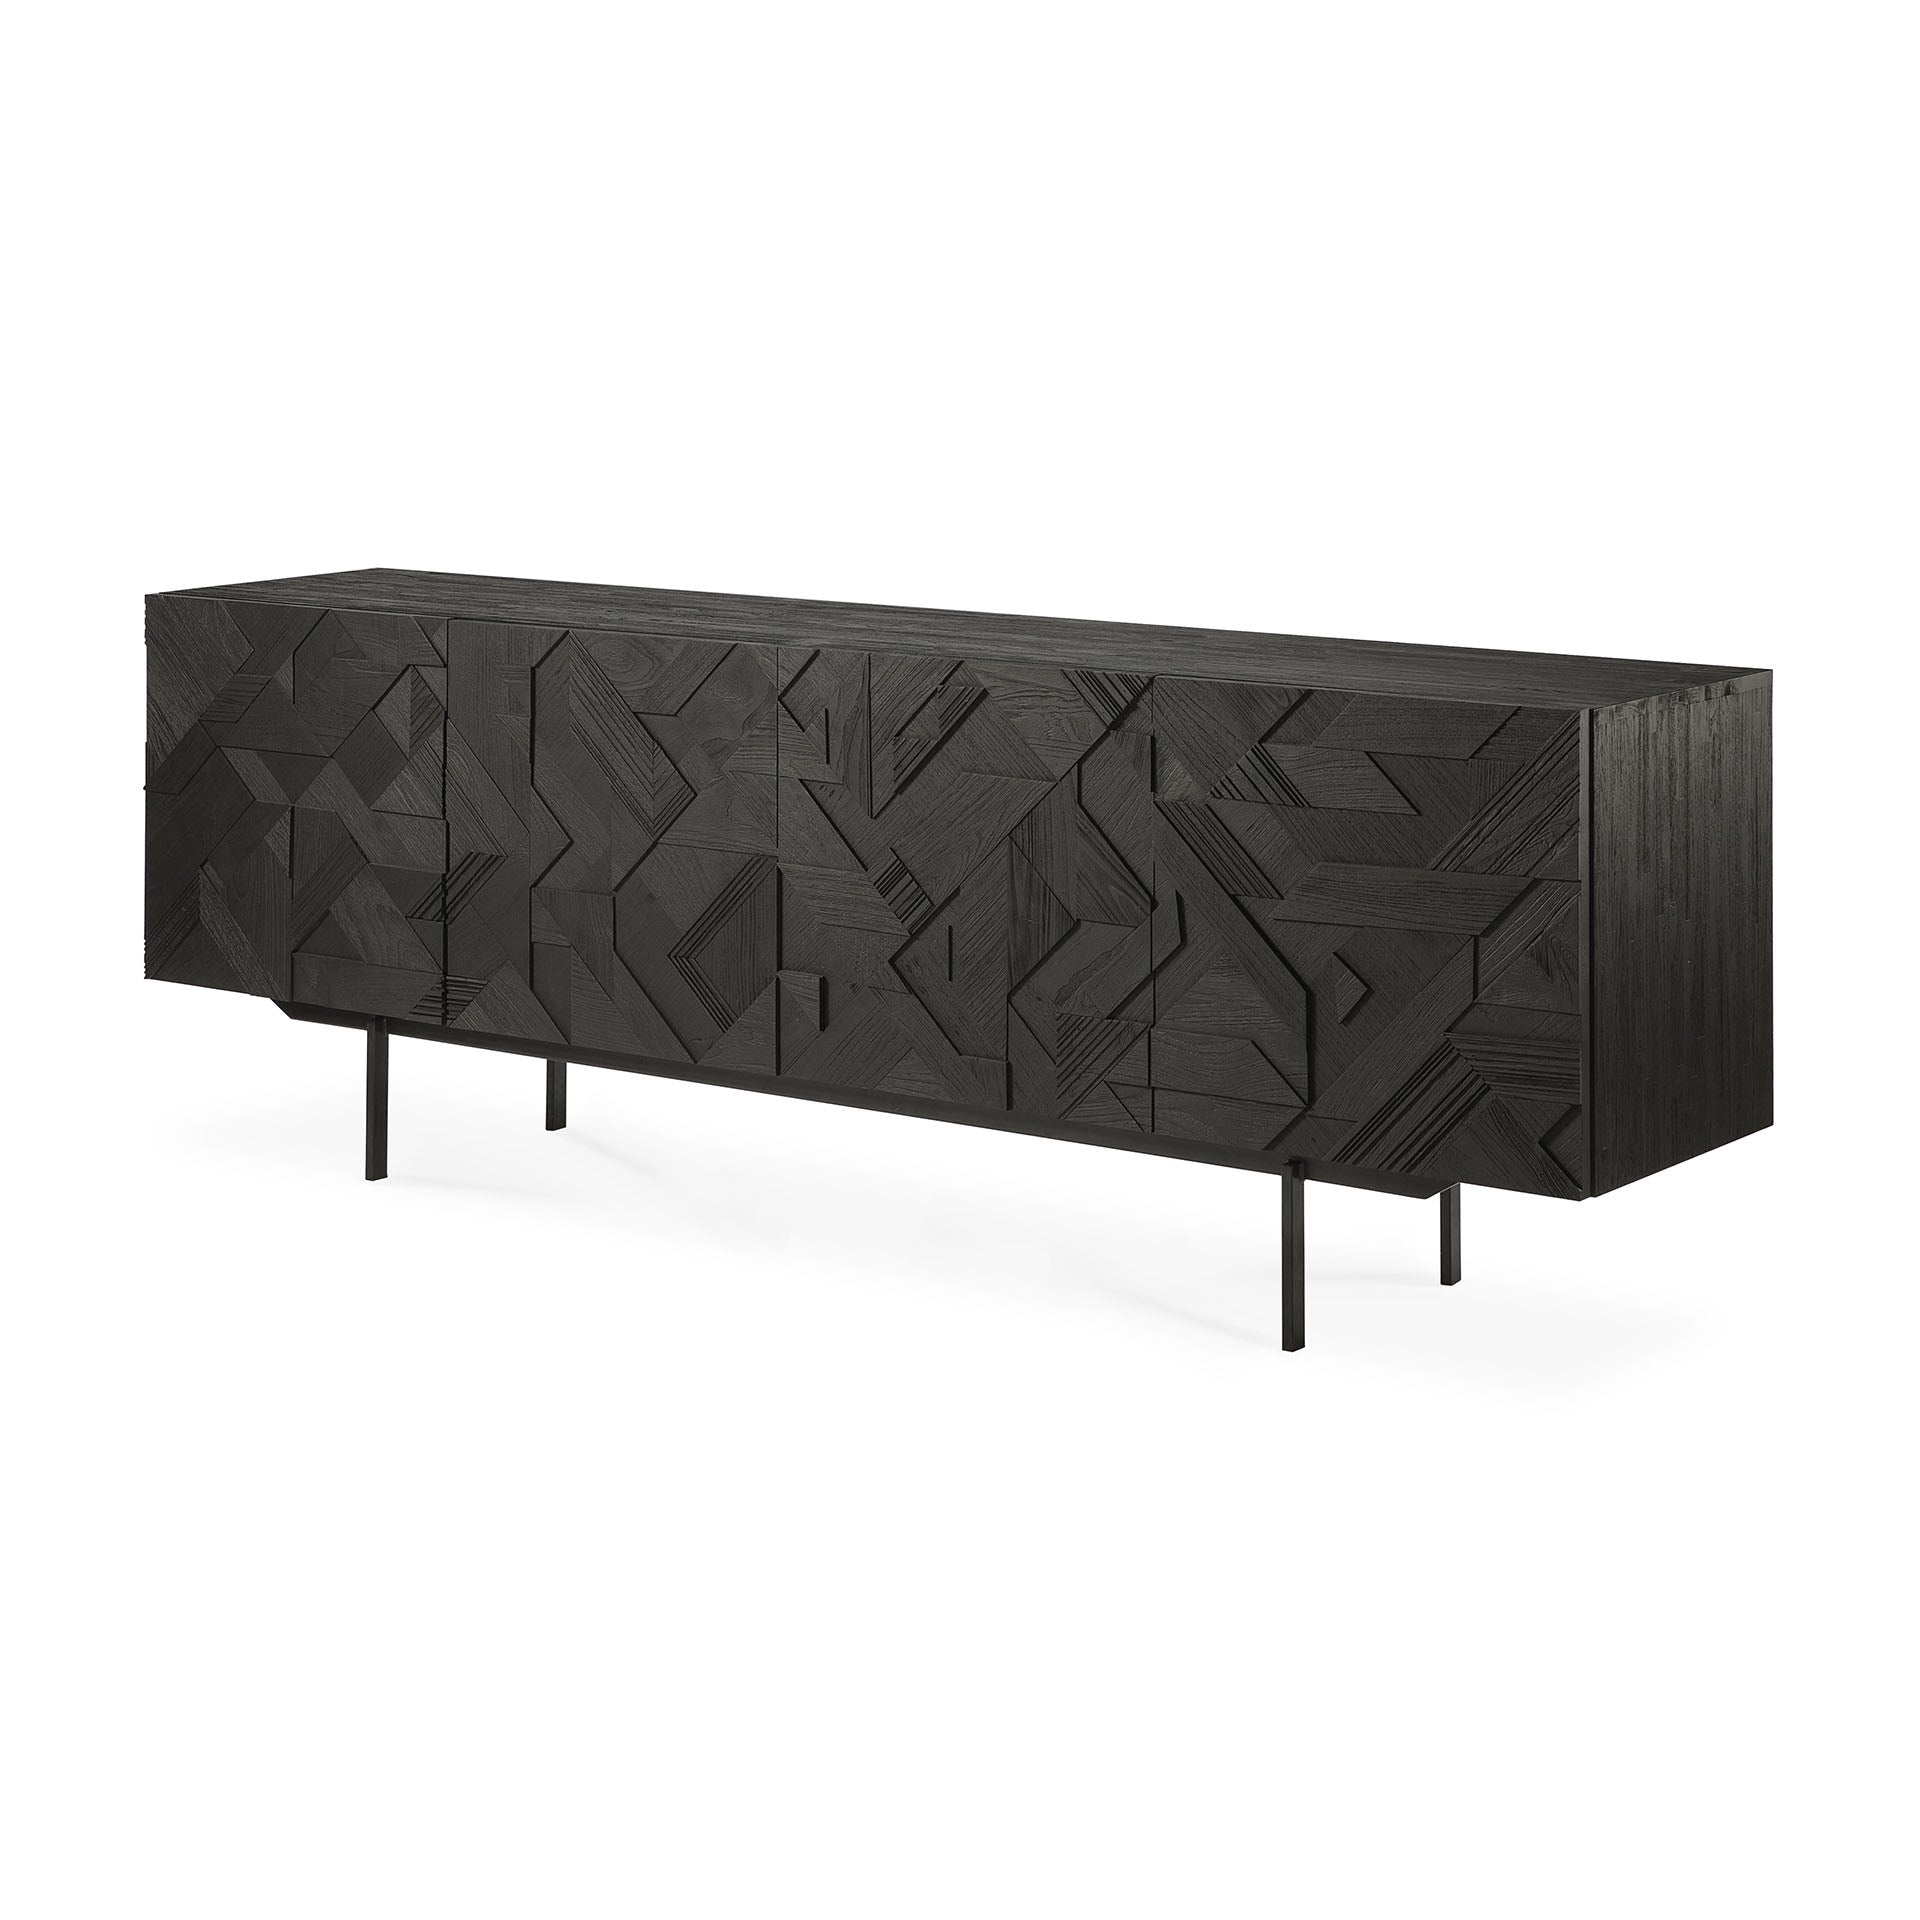 Ethnicraft Teak Graphic Sideboard is available from Make Your House A Home, Bendigo, Victoria, Australia